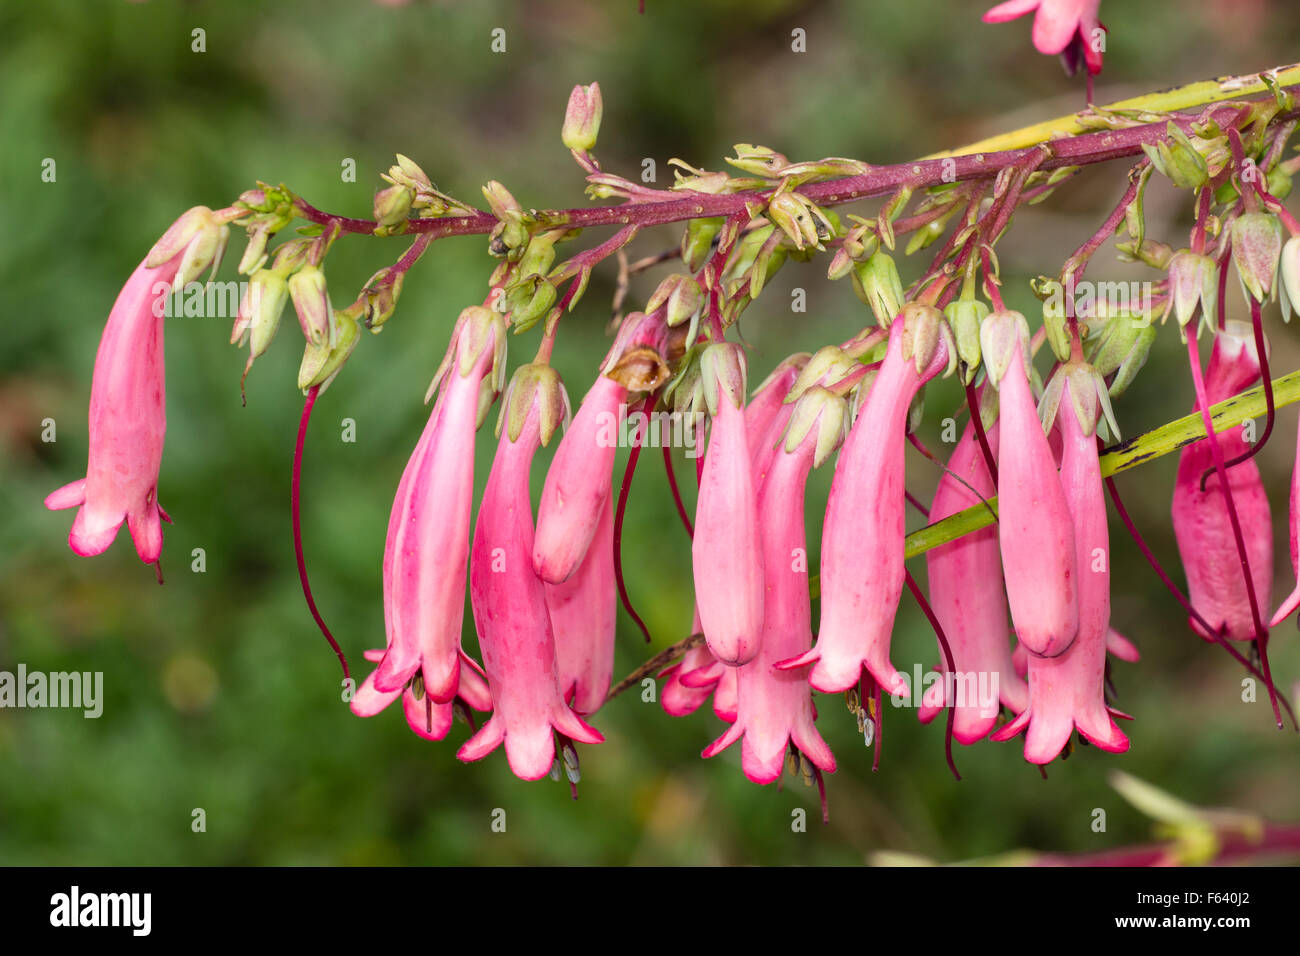 Dangling tubular summer flowers of the cape figwort, Phygelius aequalis 'Trewidden Pink' Stock Photo